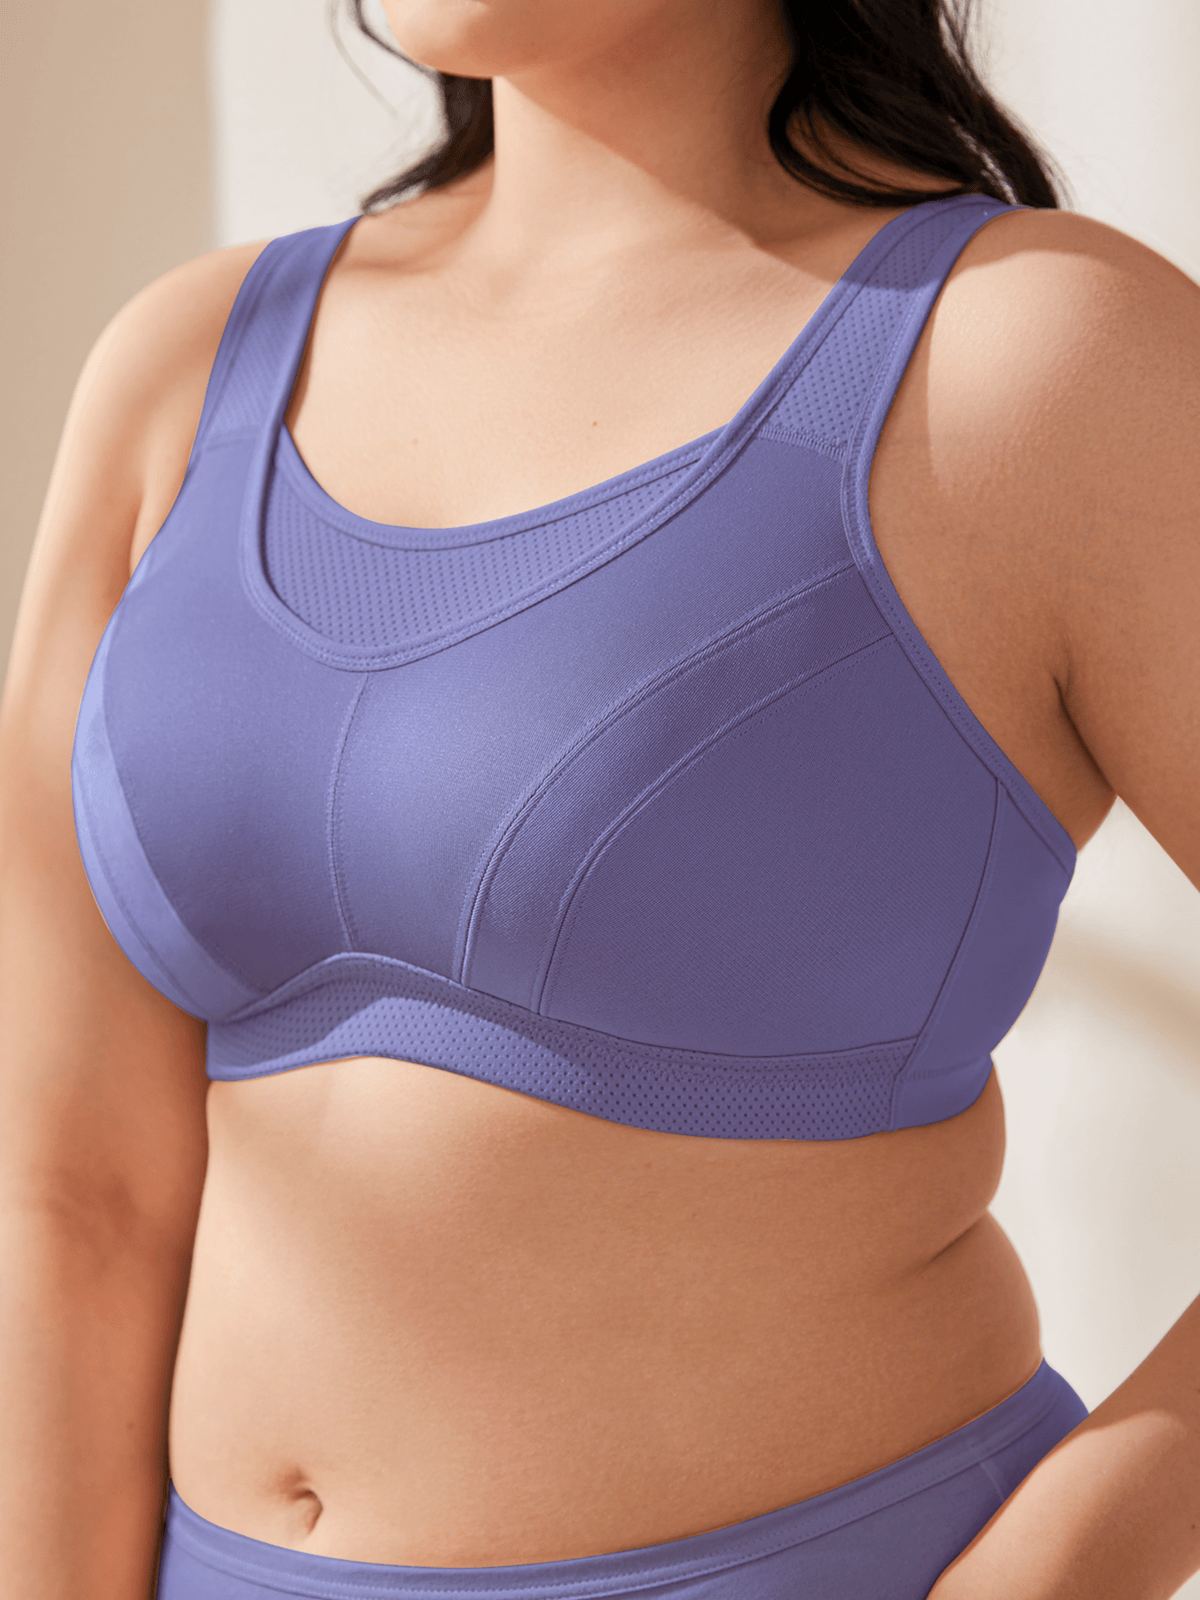 High Impact Sports Bras For Women Support Underwire Cross Back Large Bust  Cool Comfort Molded Cup Purple Eggplant 40F